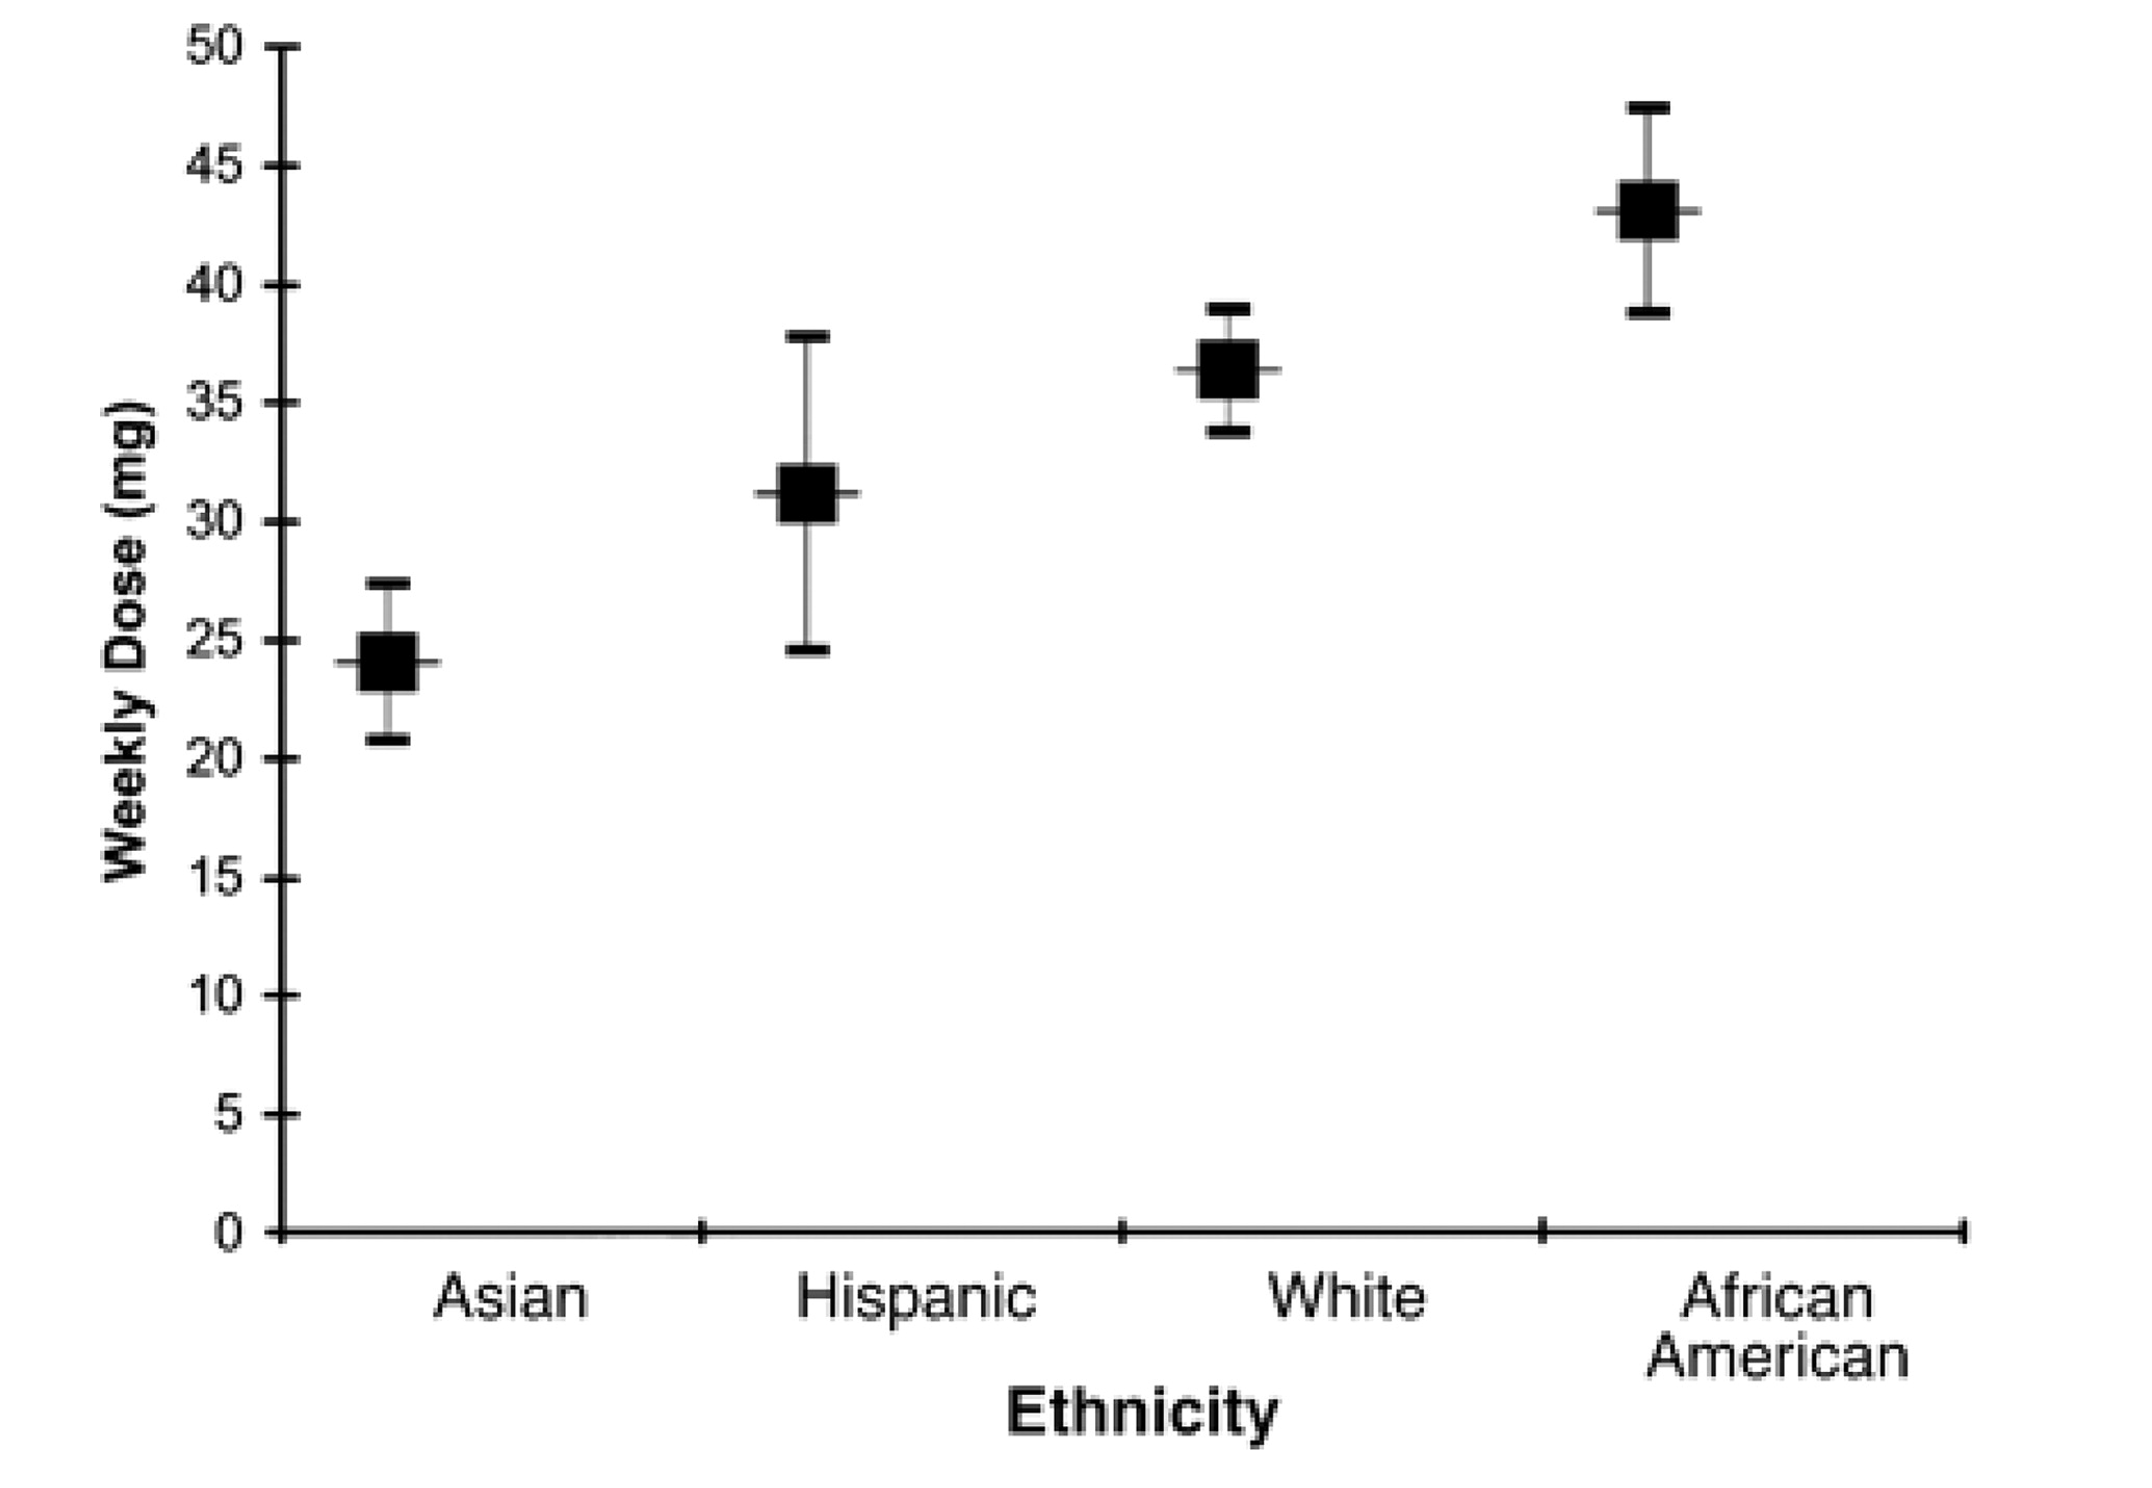 Dang MT, Hambleton J, Kayser SR. The influence of ethnicity on warfarin dosage requirement. Ann Pharmacother. 2005; 39: 1008–1012